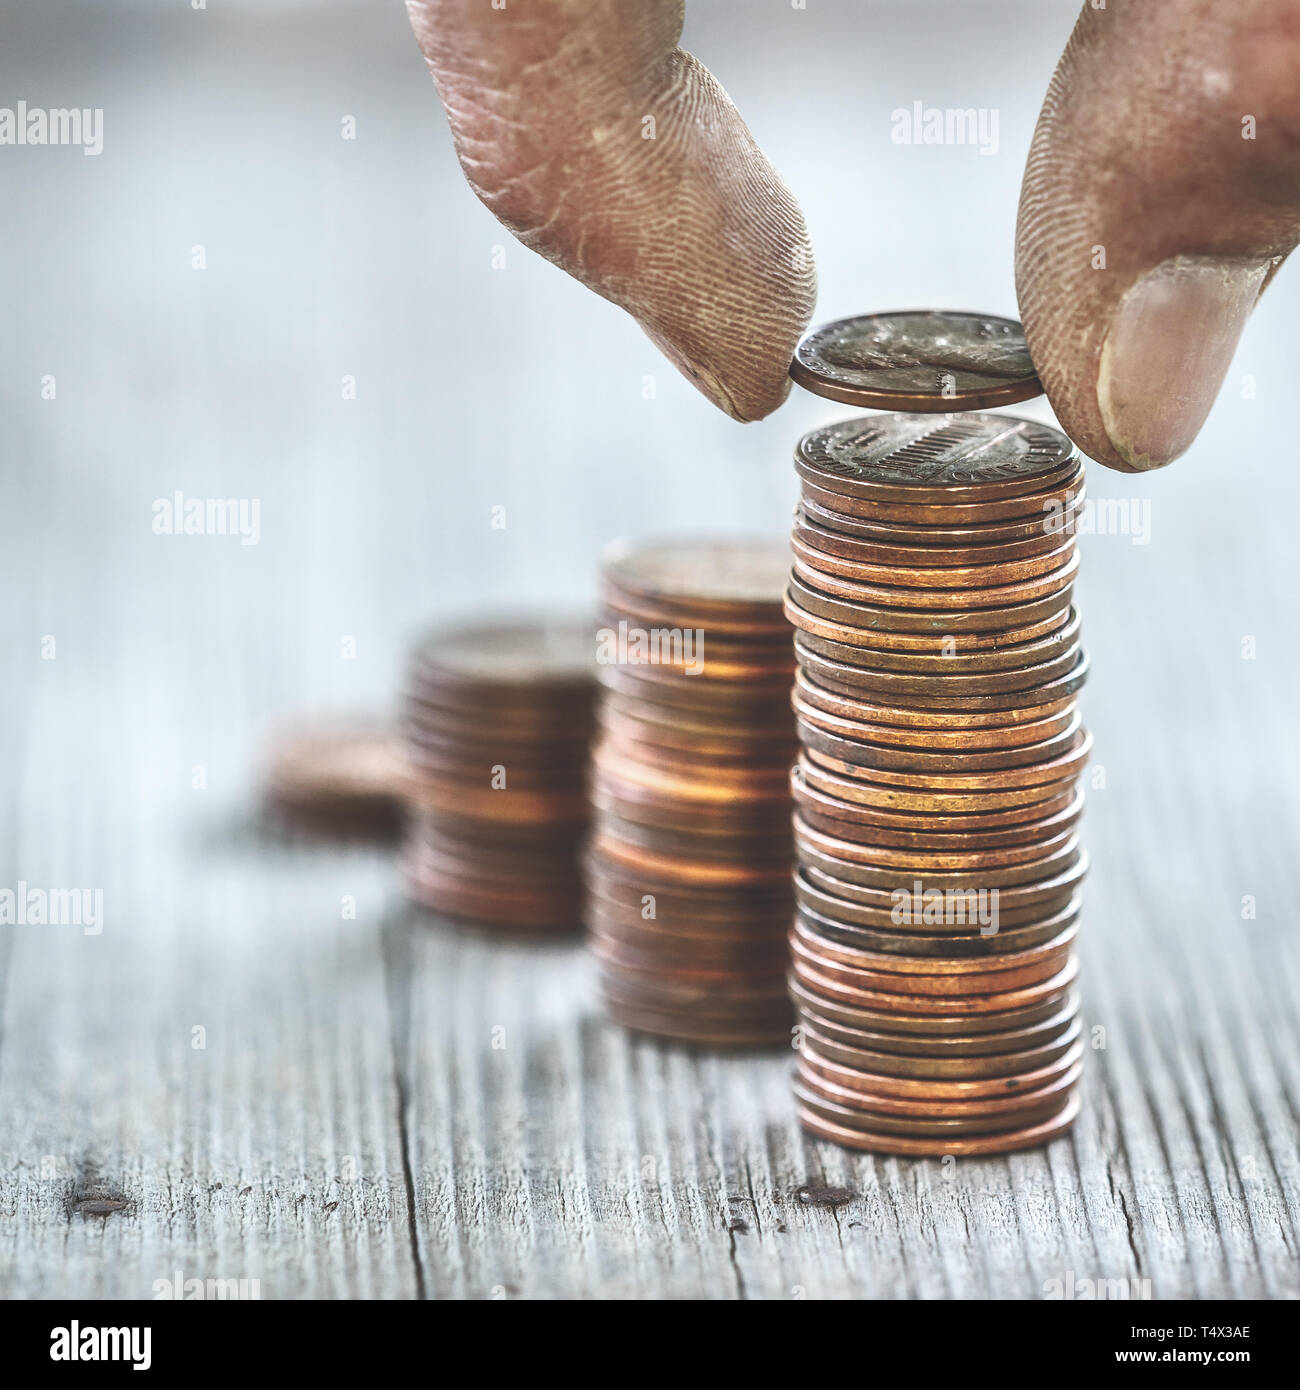 Dirty Hand Counting Coins Stock Photo